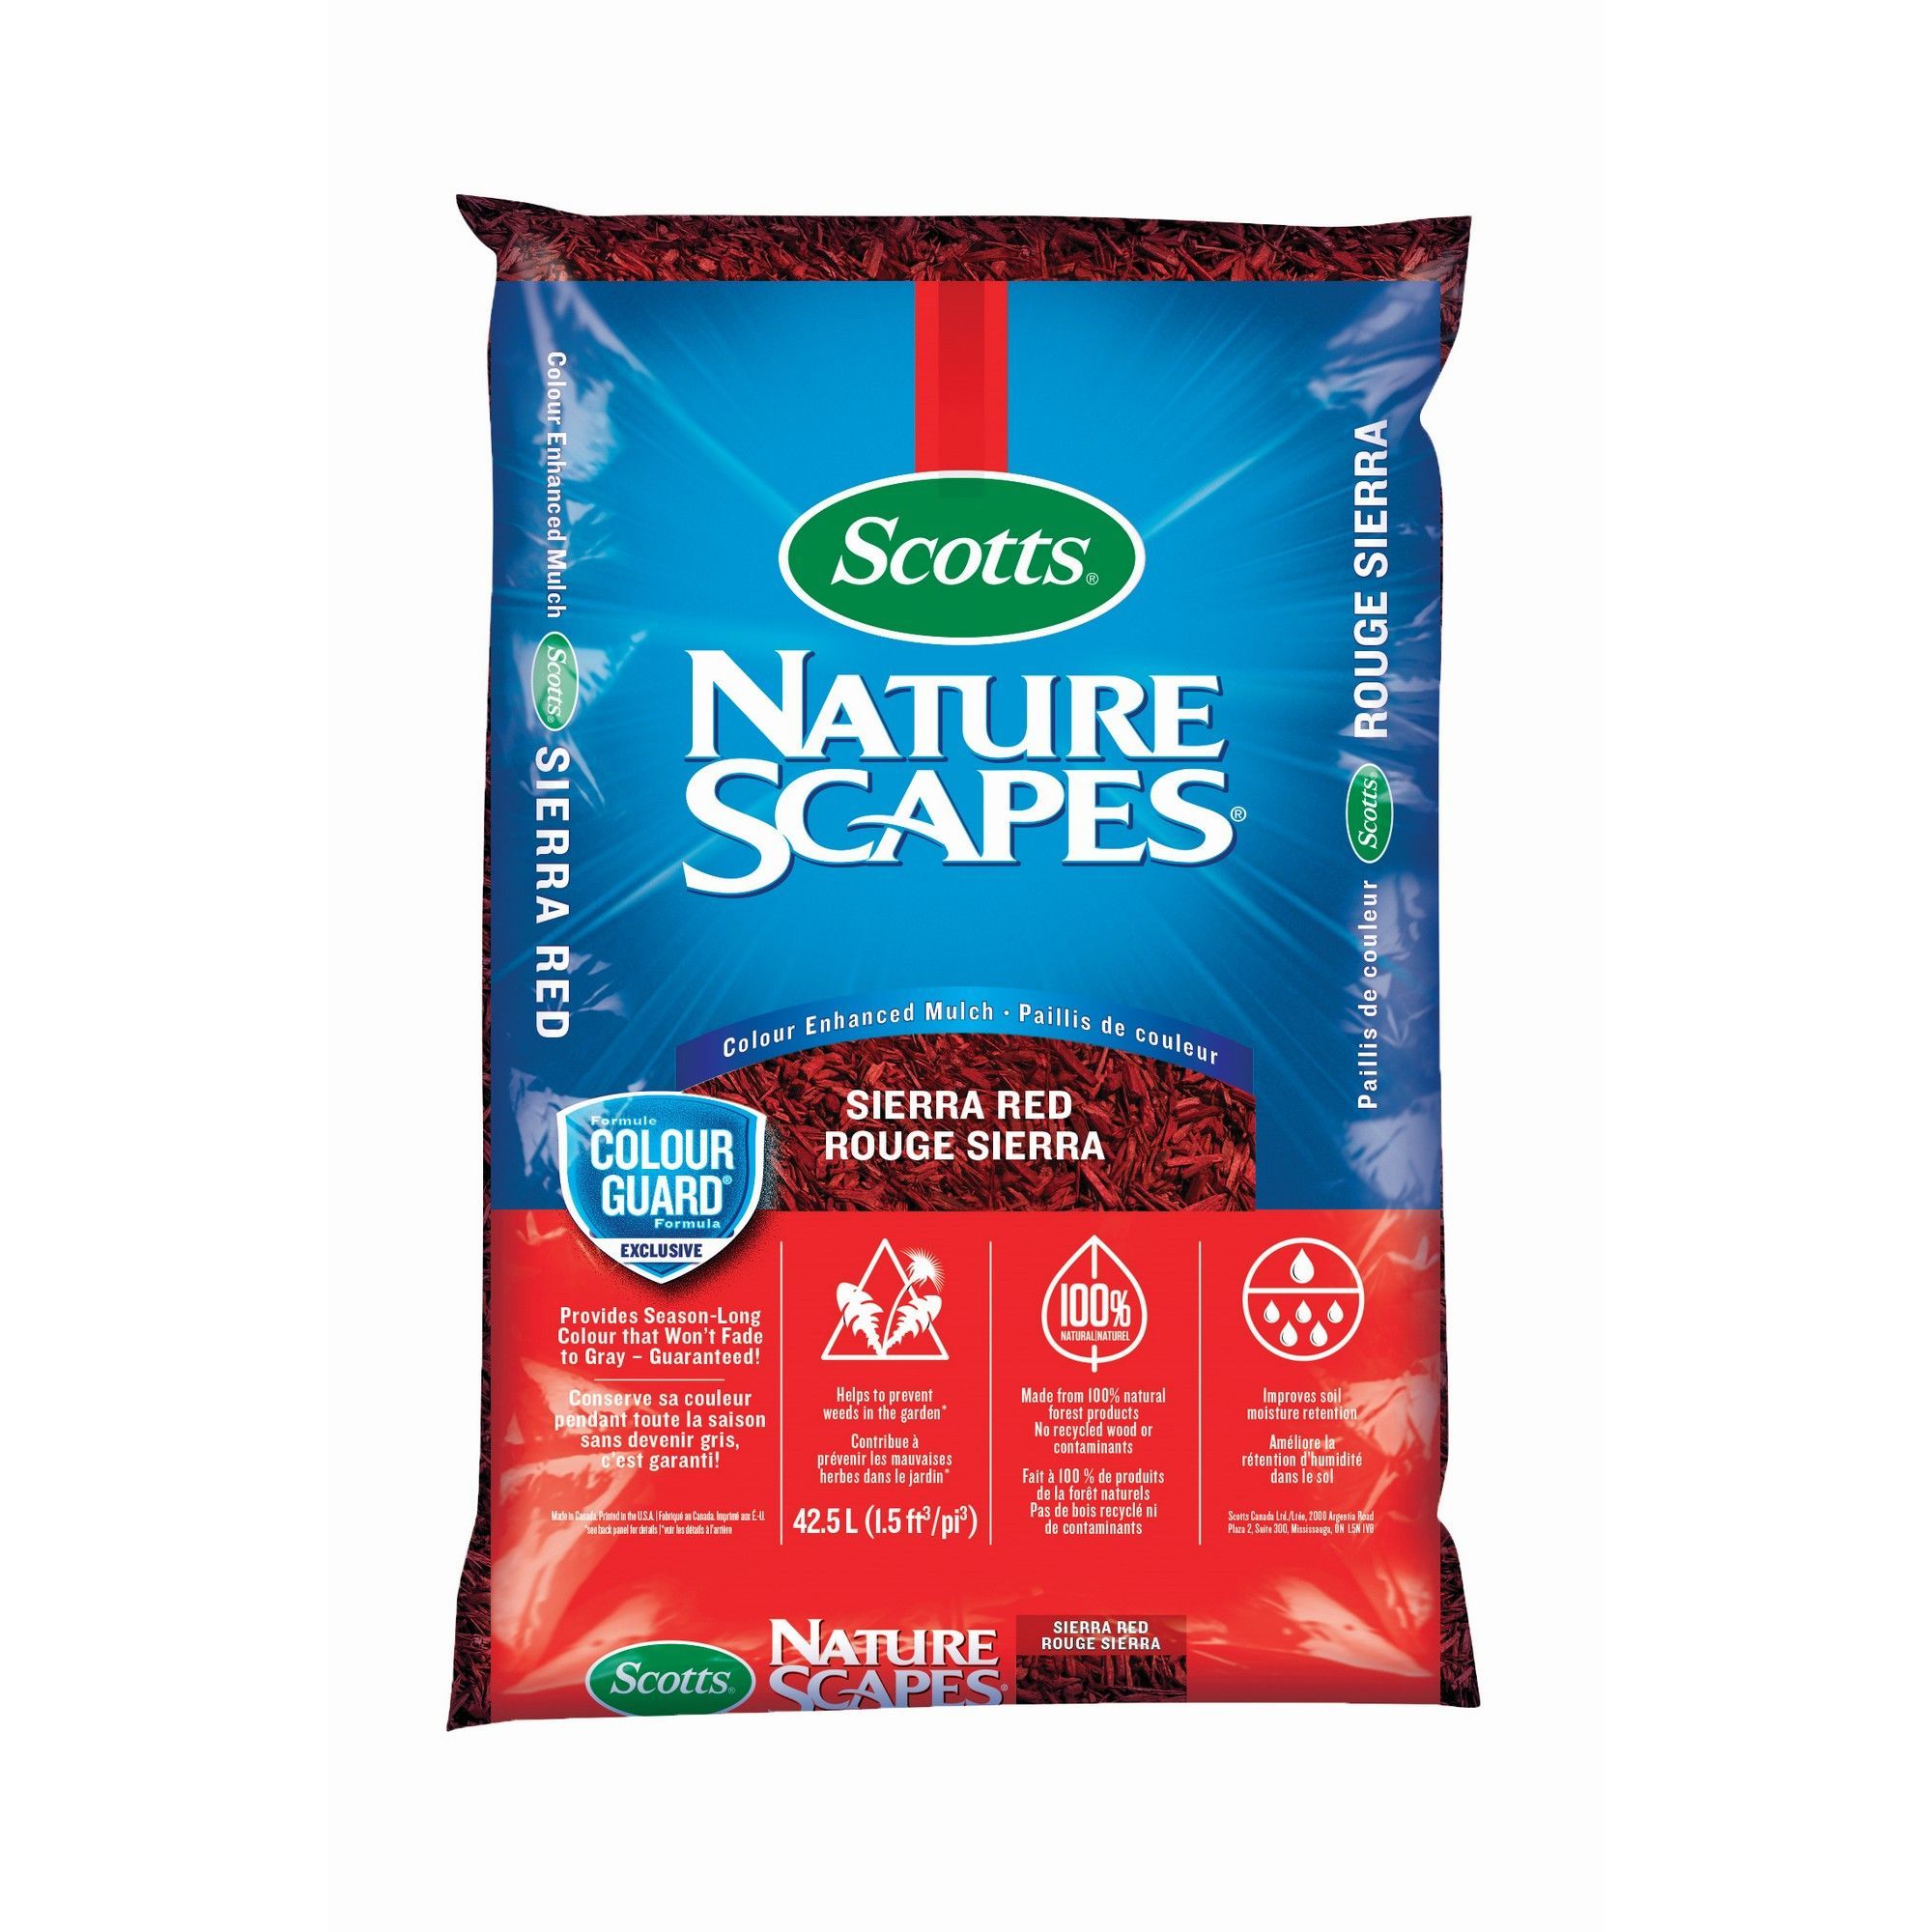 scotts-nature-scapes-mulch-from-scotts-bmr